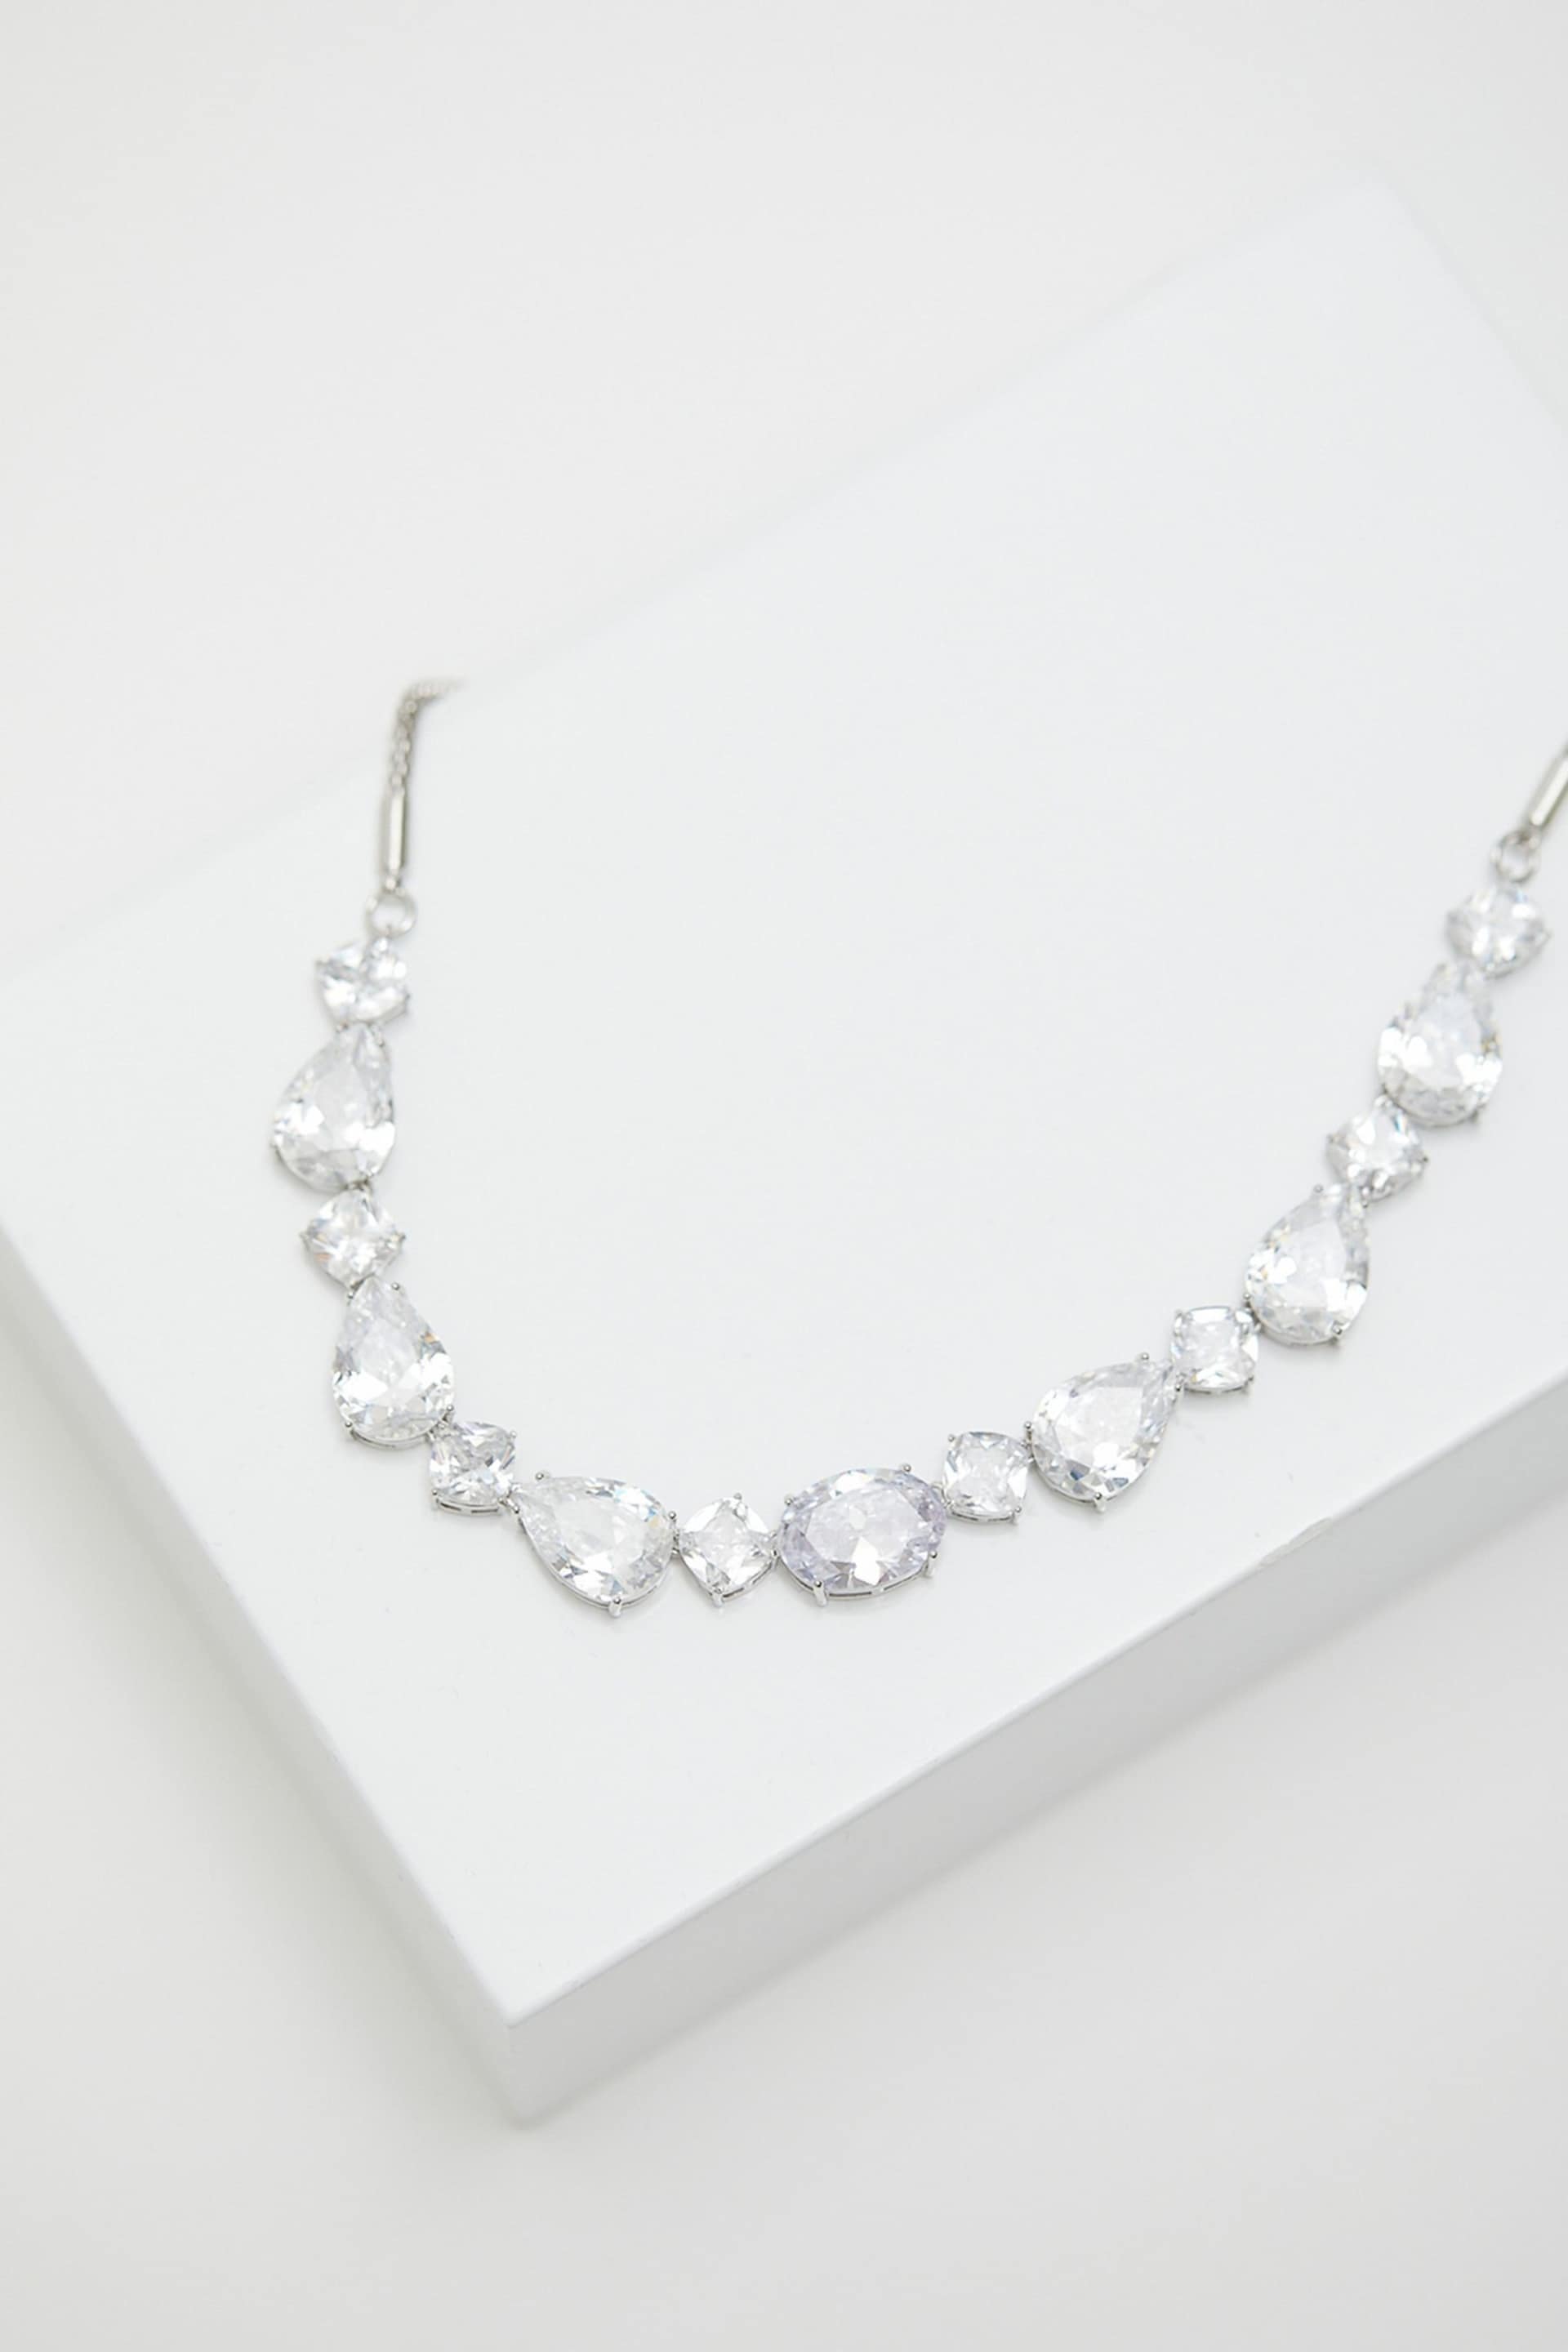 Jon Richard Silver Cubic Zirconia Mixed Stone Necklace - Gift Boxed - Image 2 of 4